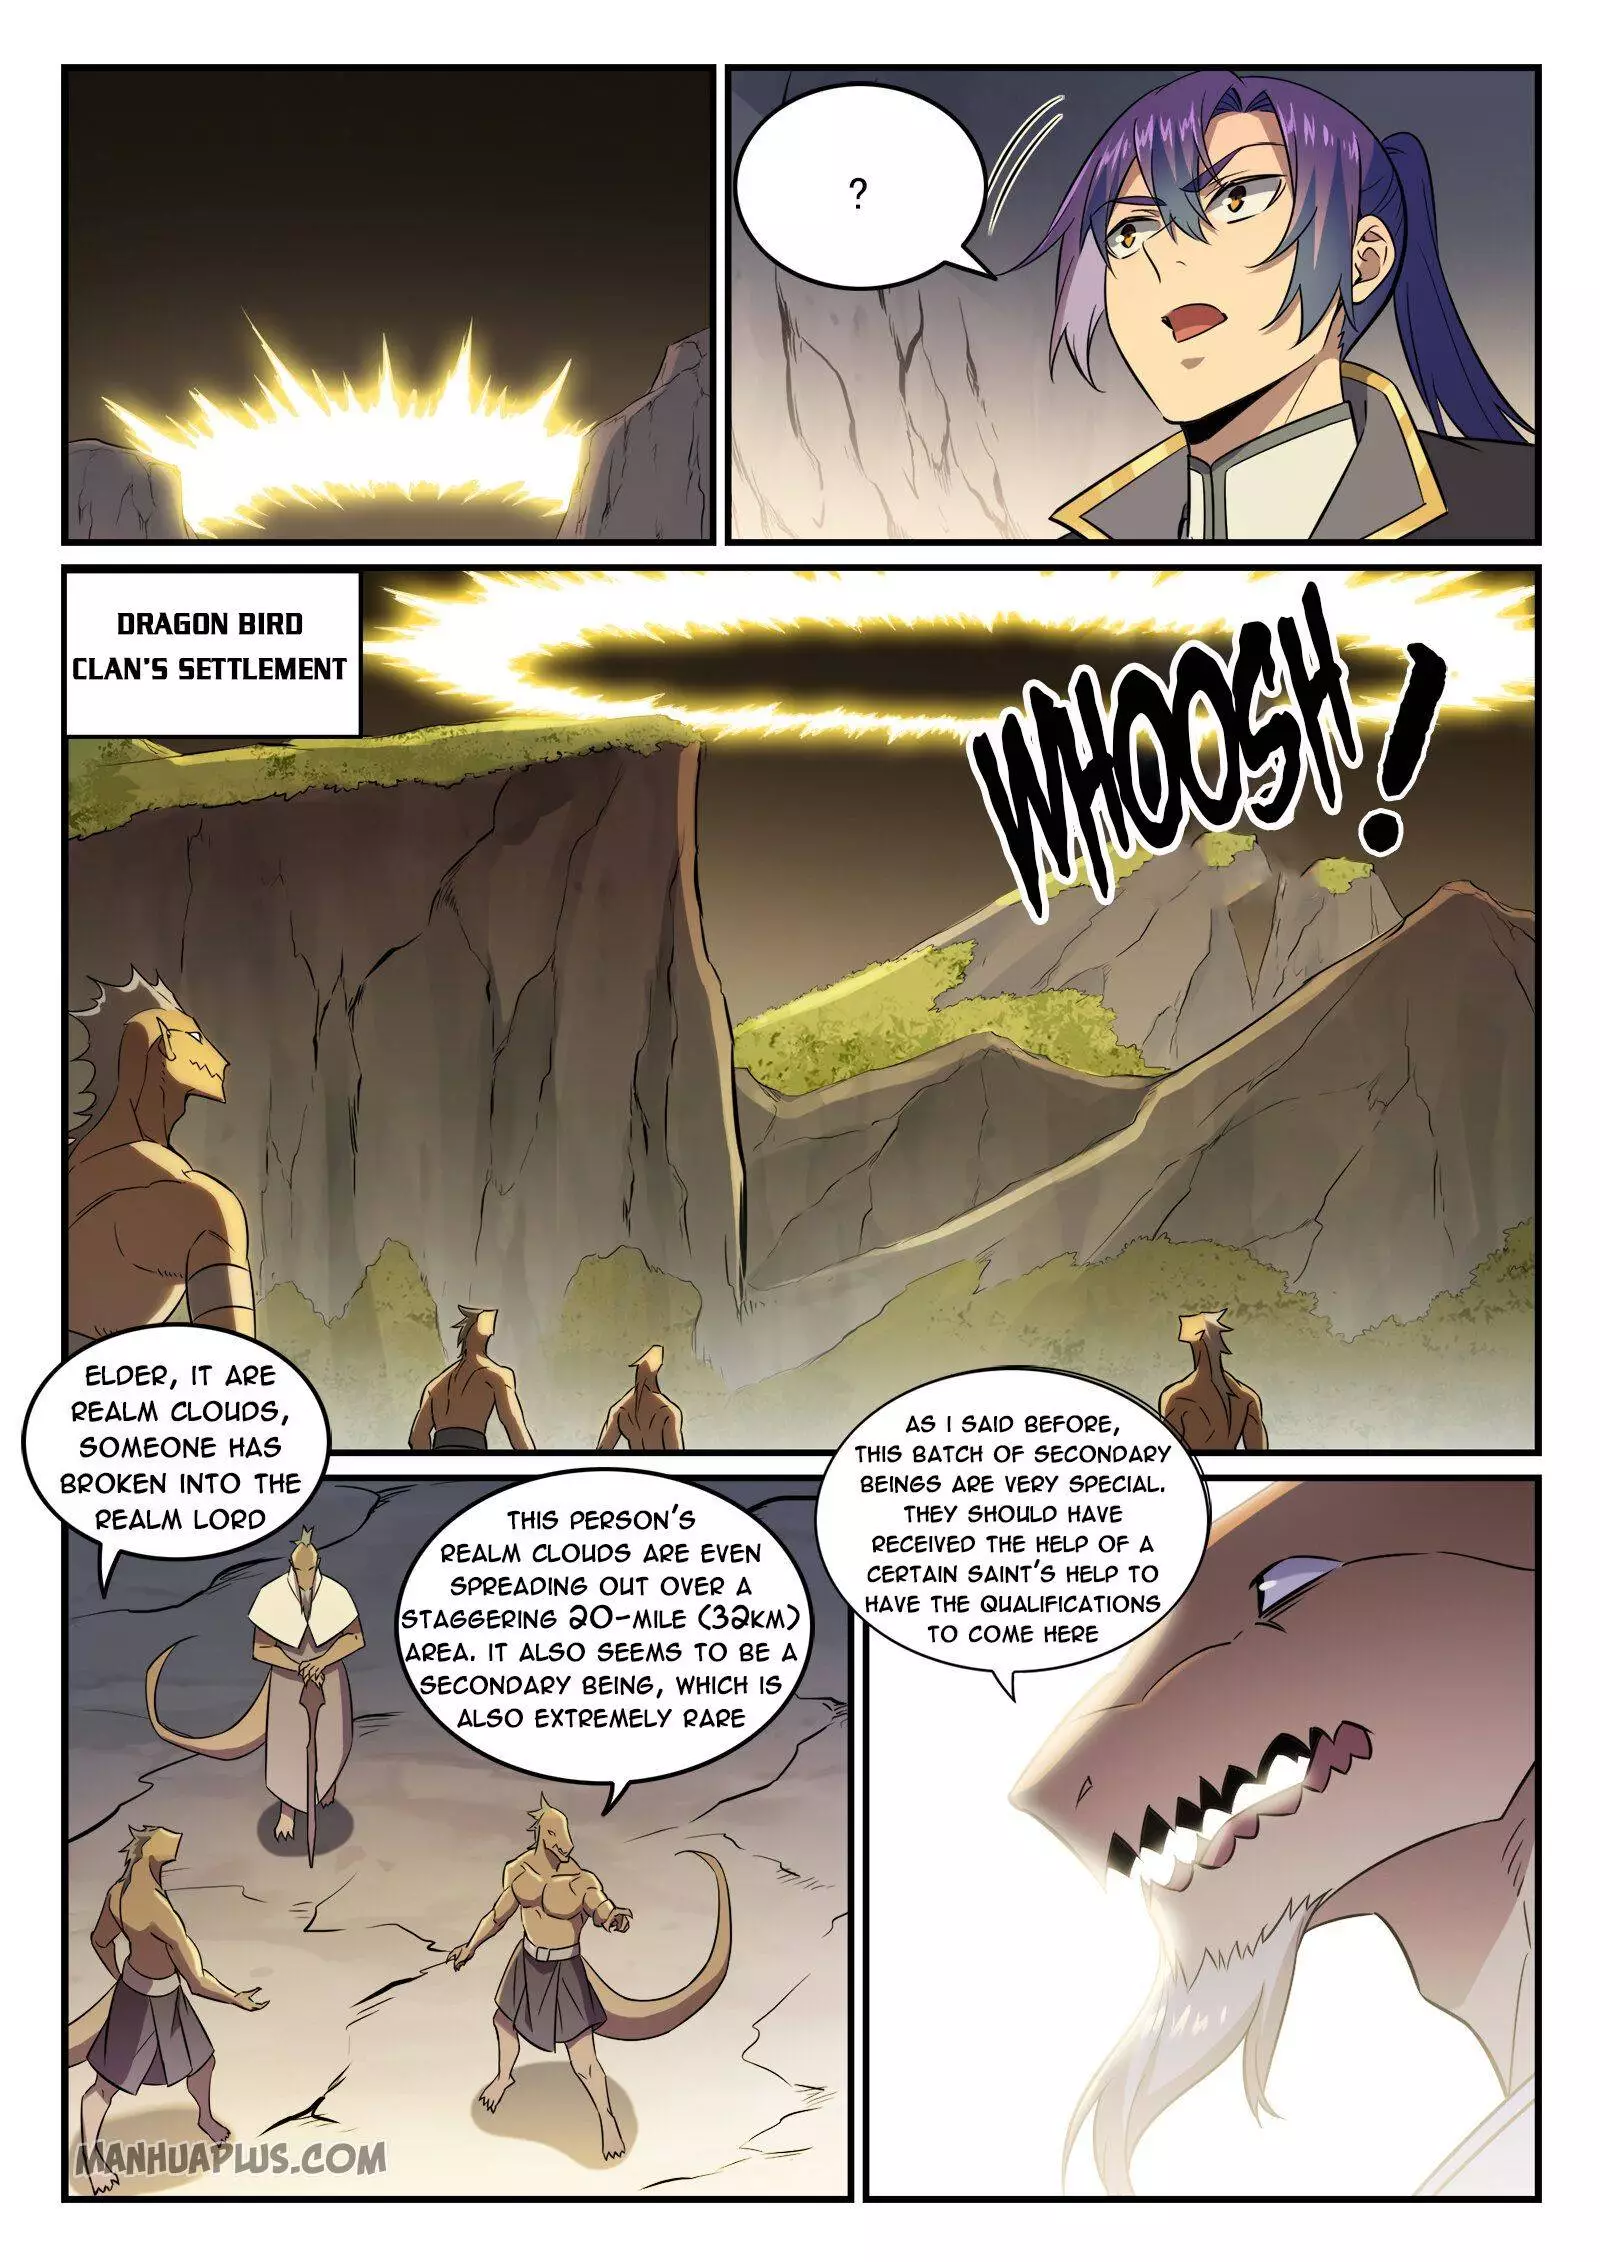 Apotheosis - Elevation to the status of a god - 770 page 5